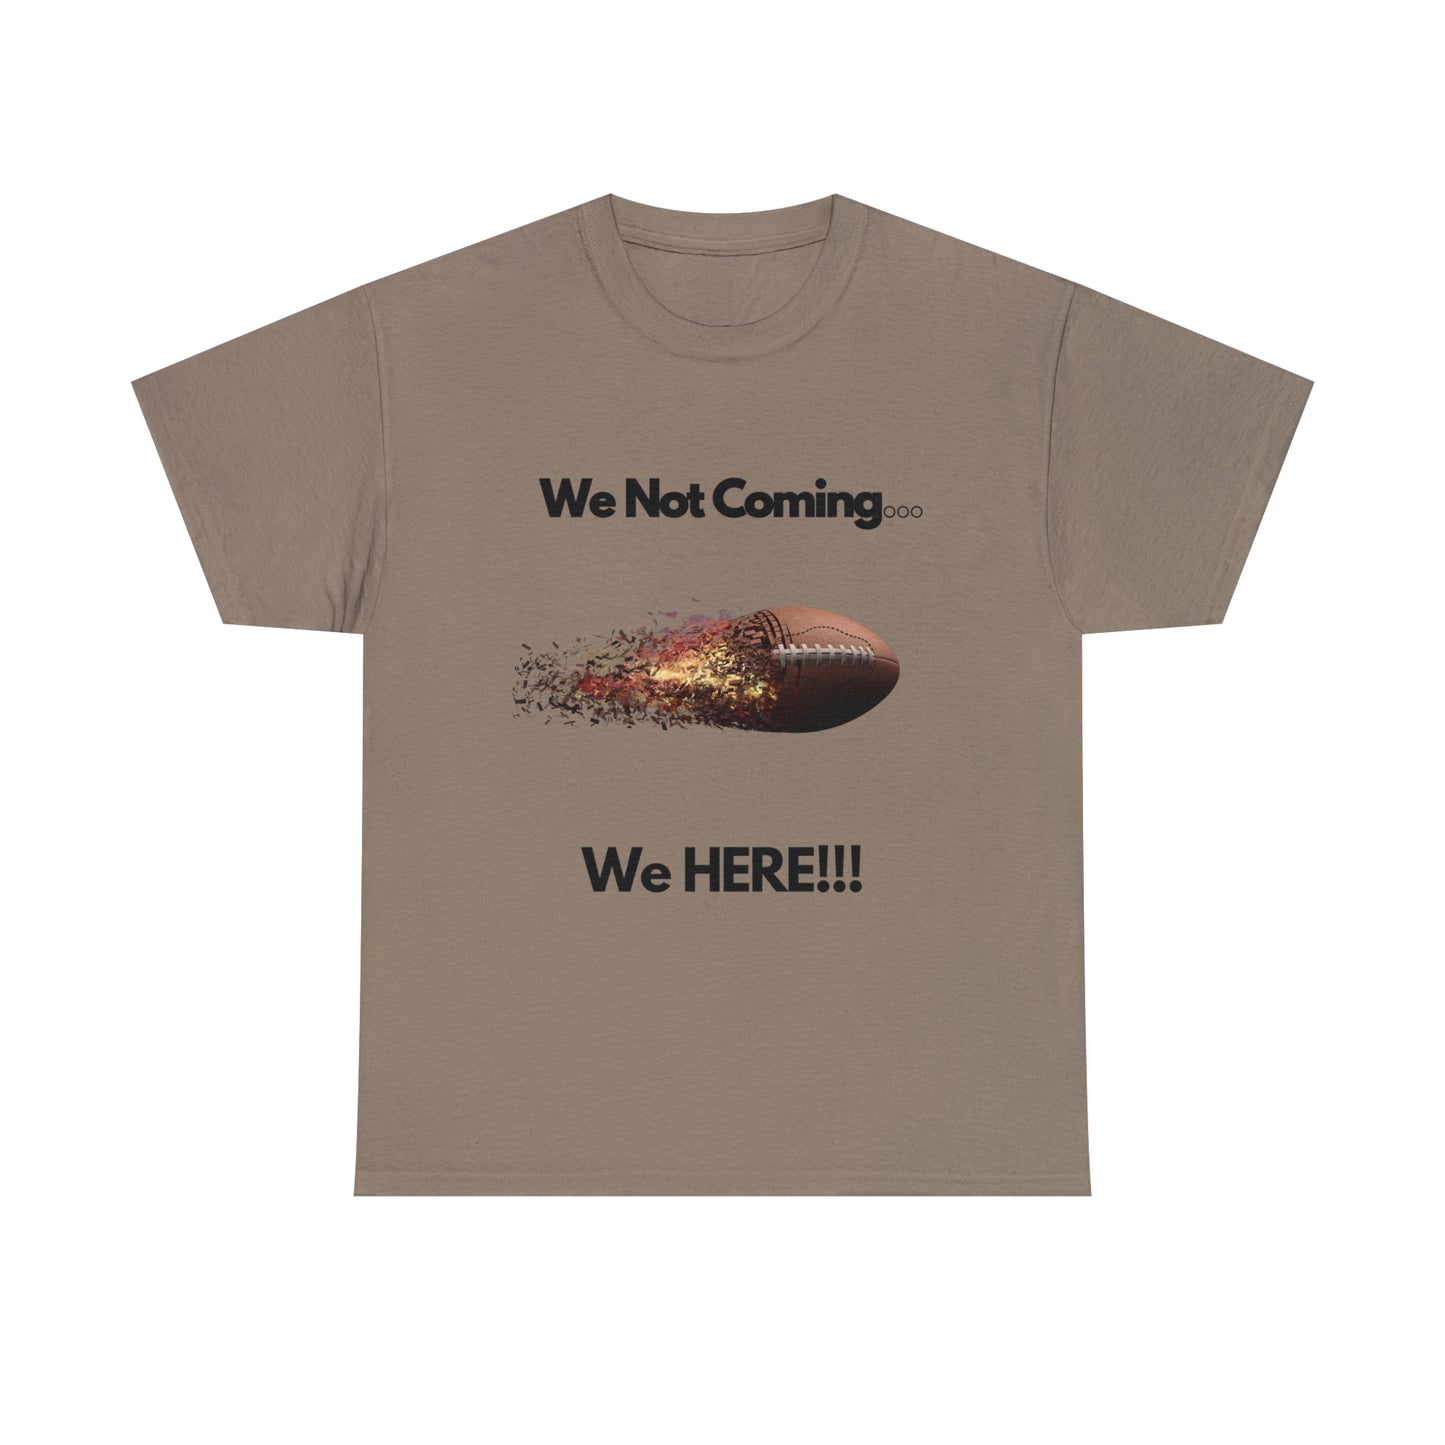 We Not Coming We HERE  t-shirts